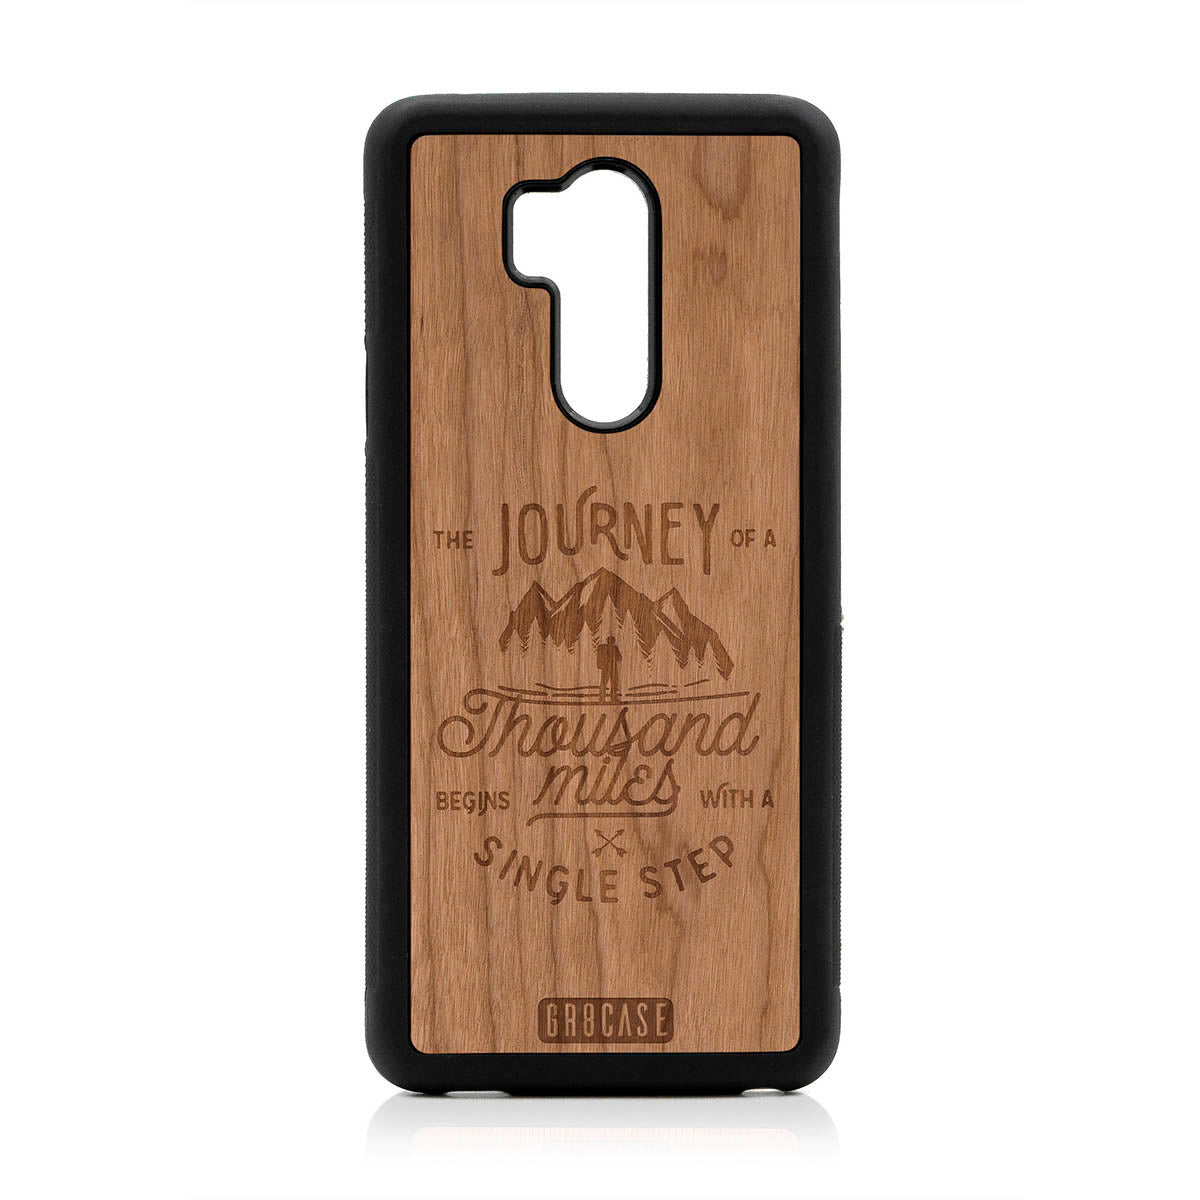 The Journey Of A Thousand Miles Begins With A Single Step Design Wood Case For LG G7 ThinQ